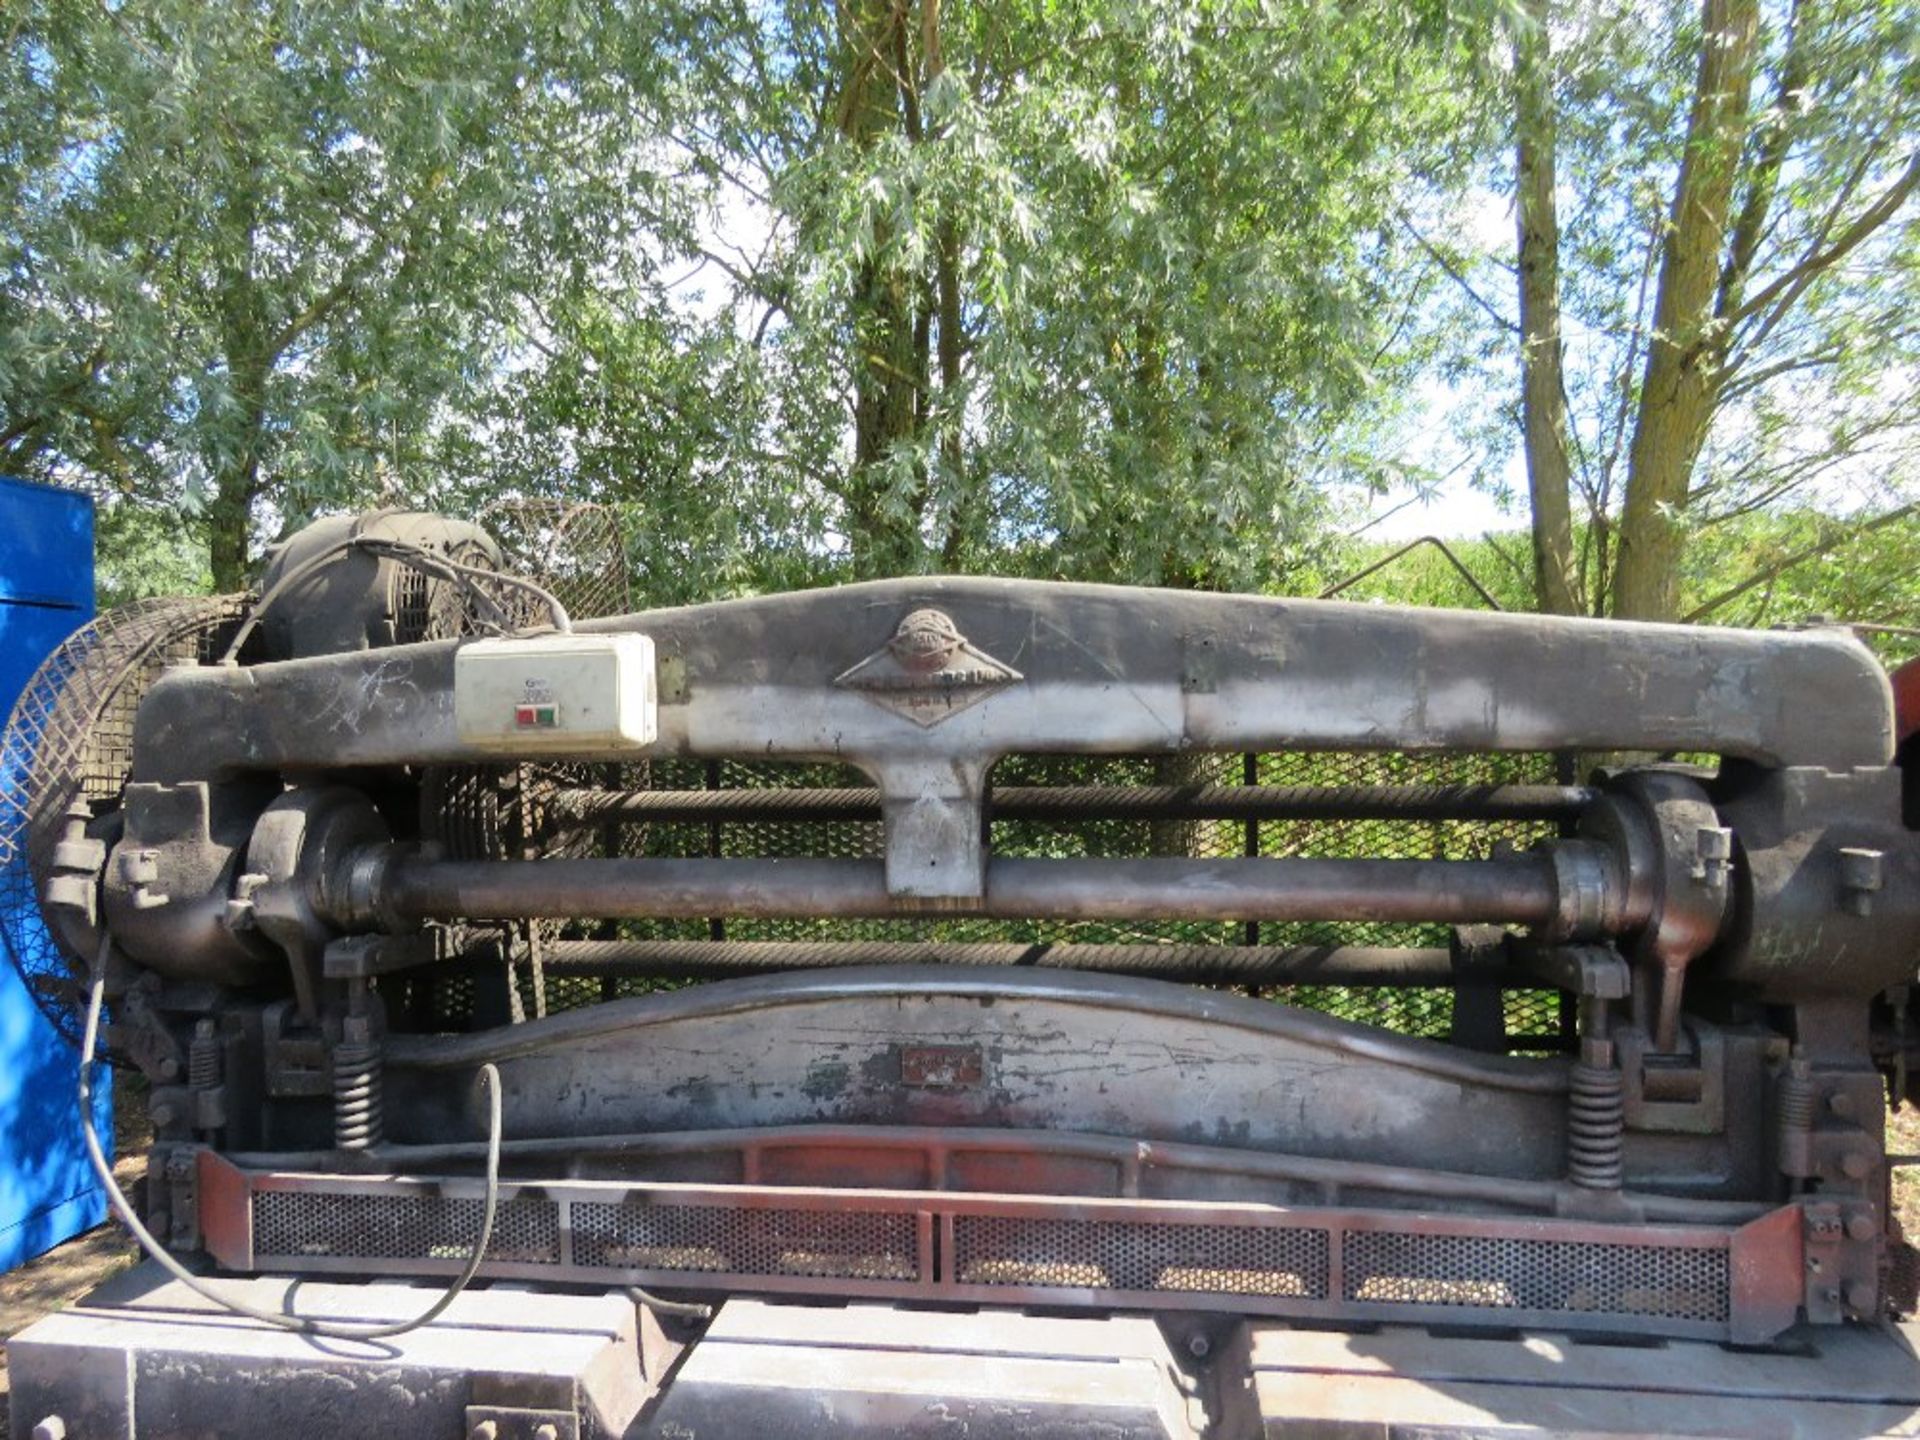 EDWARDS OLD METAL WORKING GUILLOTENE UNIT, WEIGHT 6TONNES APPROX (BUYER TO ARRANGE CRANEAGE, WE CAN - Image 7 of 7